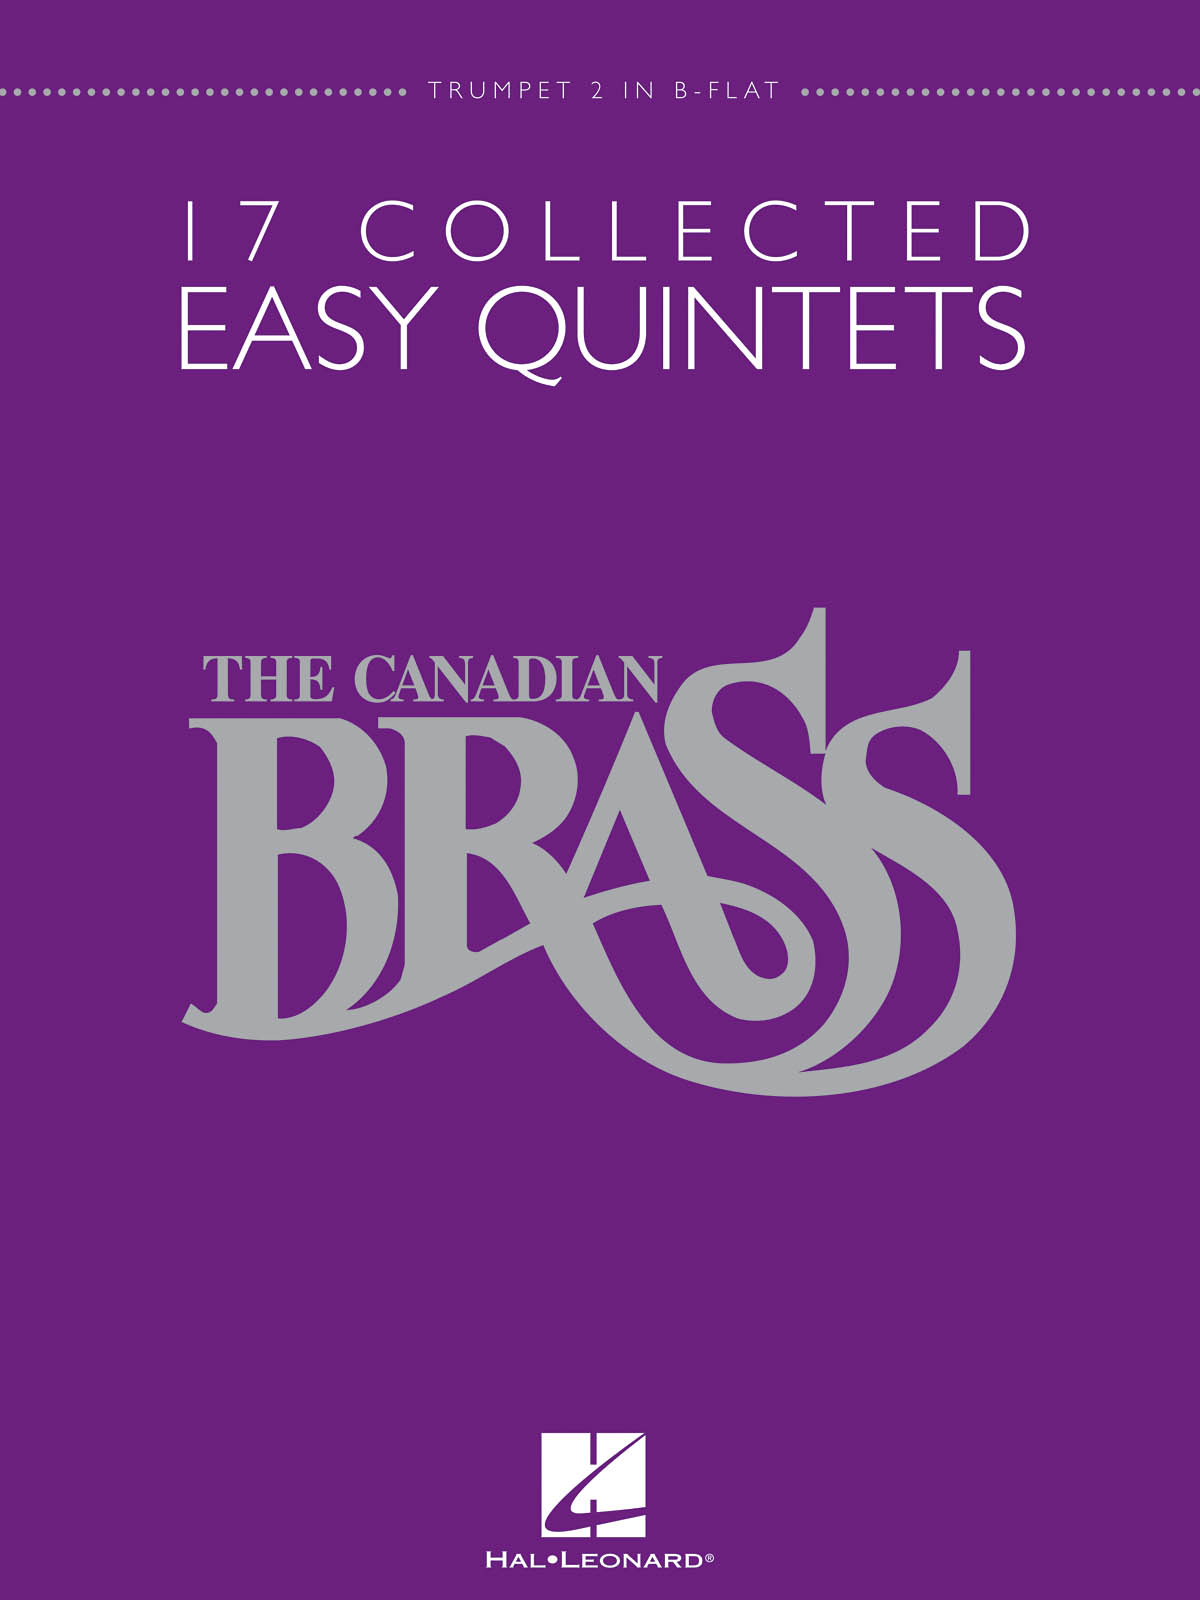 The Canadian Brass: 17 Collected Easy Quintets: Trumpet: Part